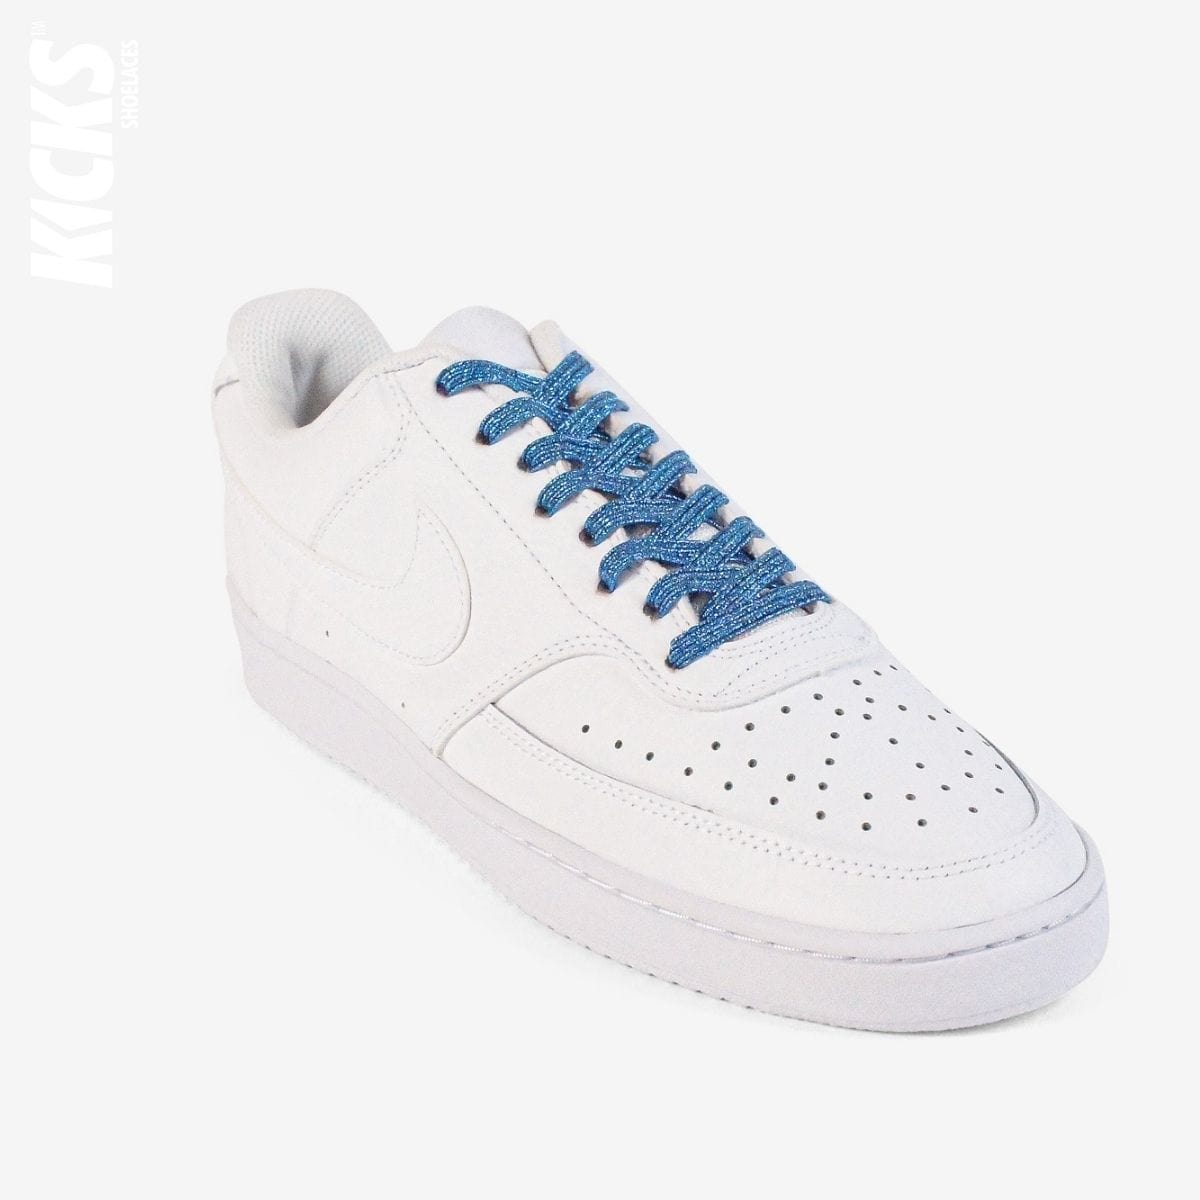 elastic-no-tie-shoelaces-with-blue-laces-on-nike-white-sneakers